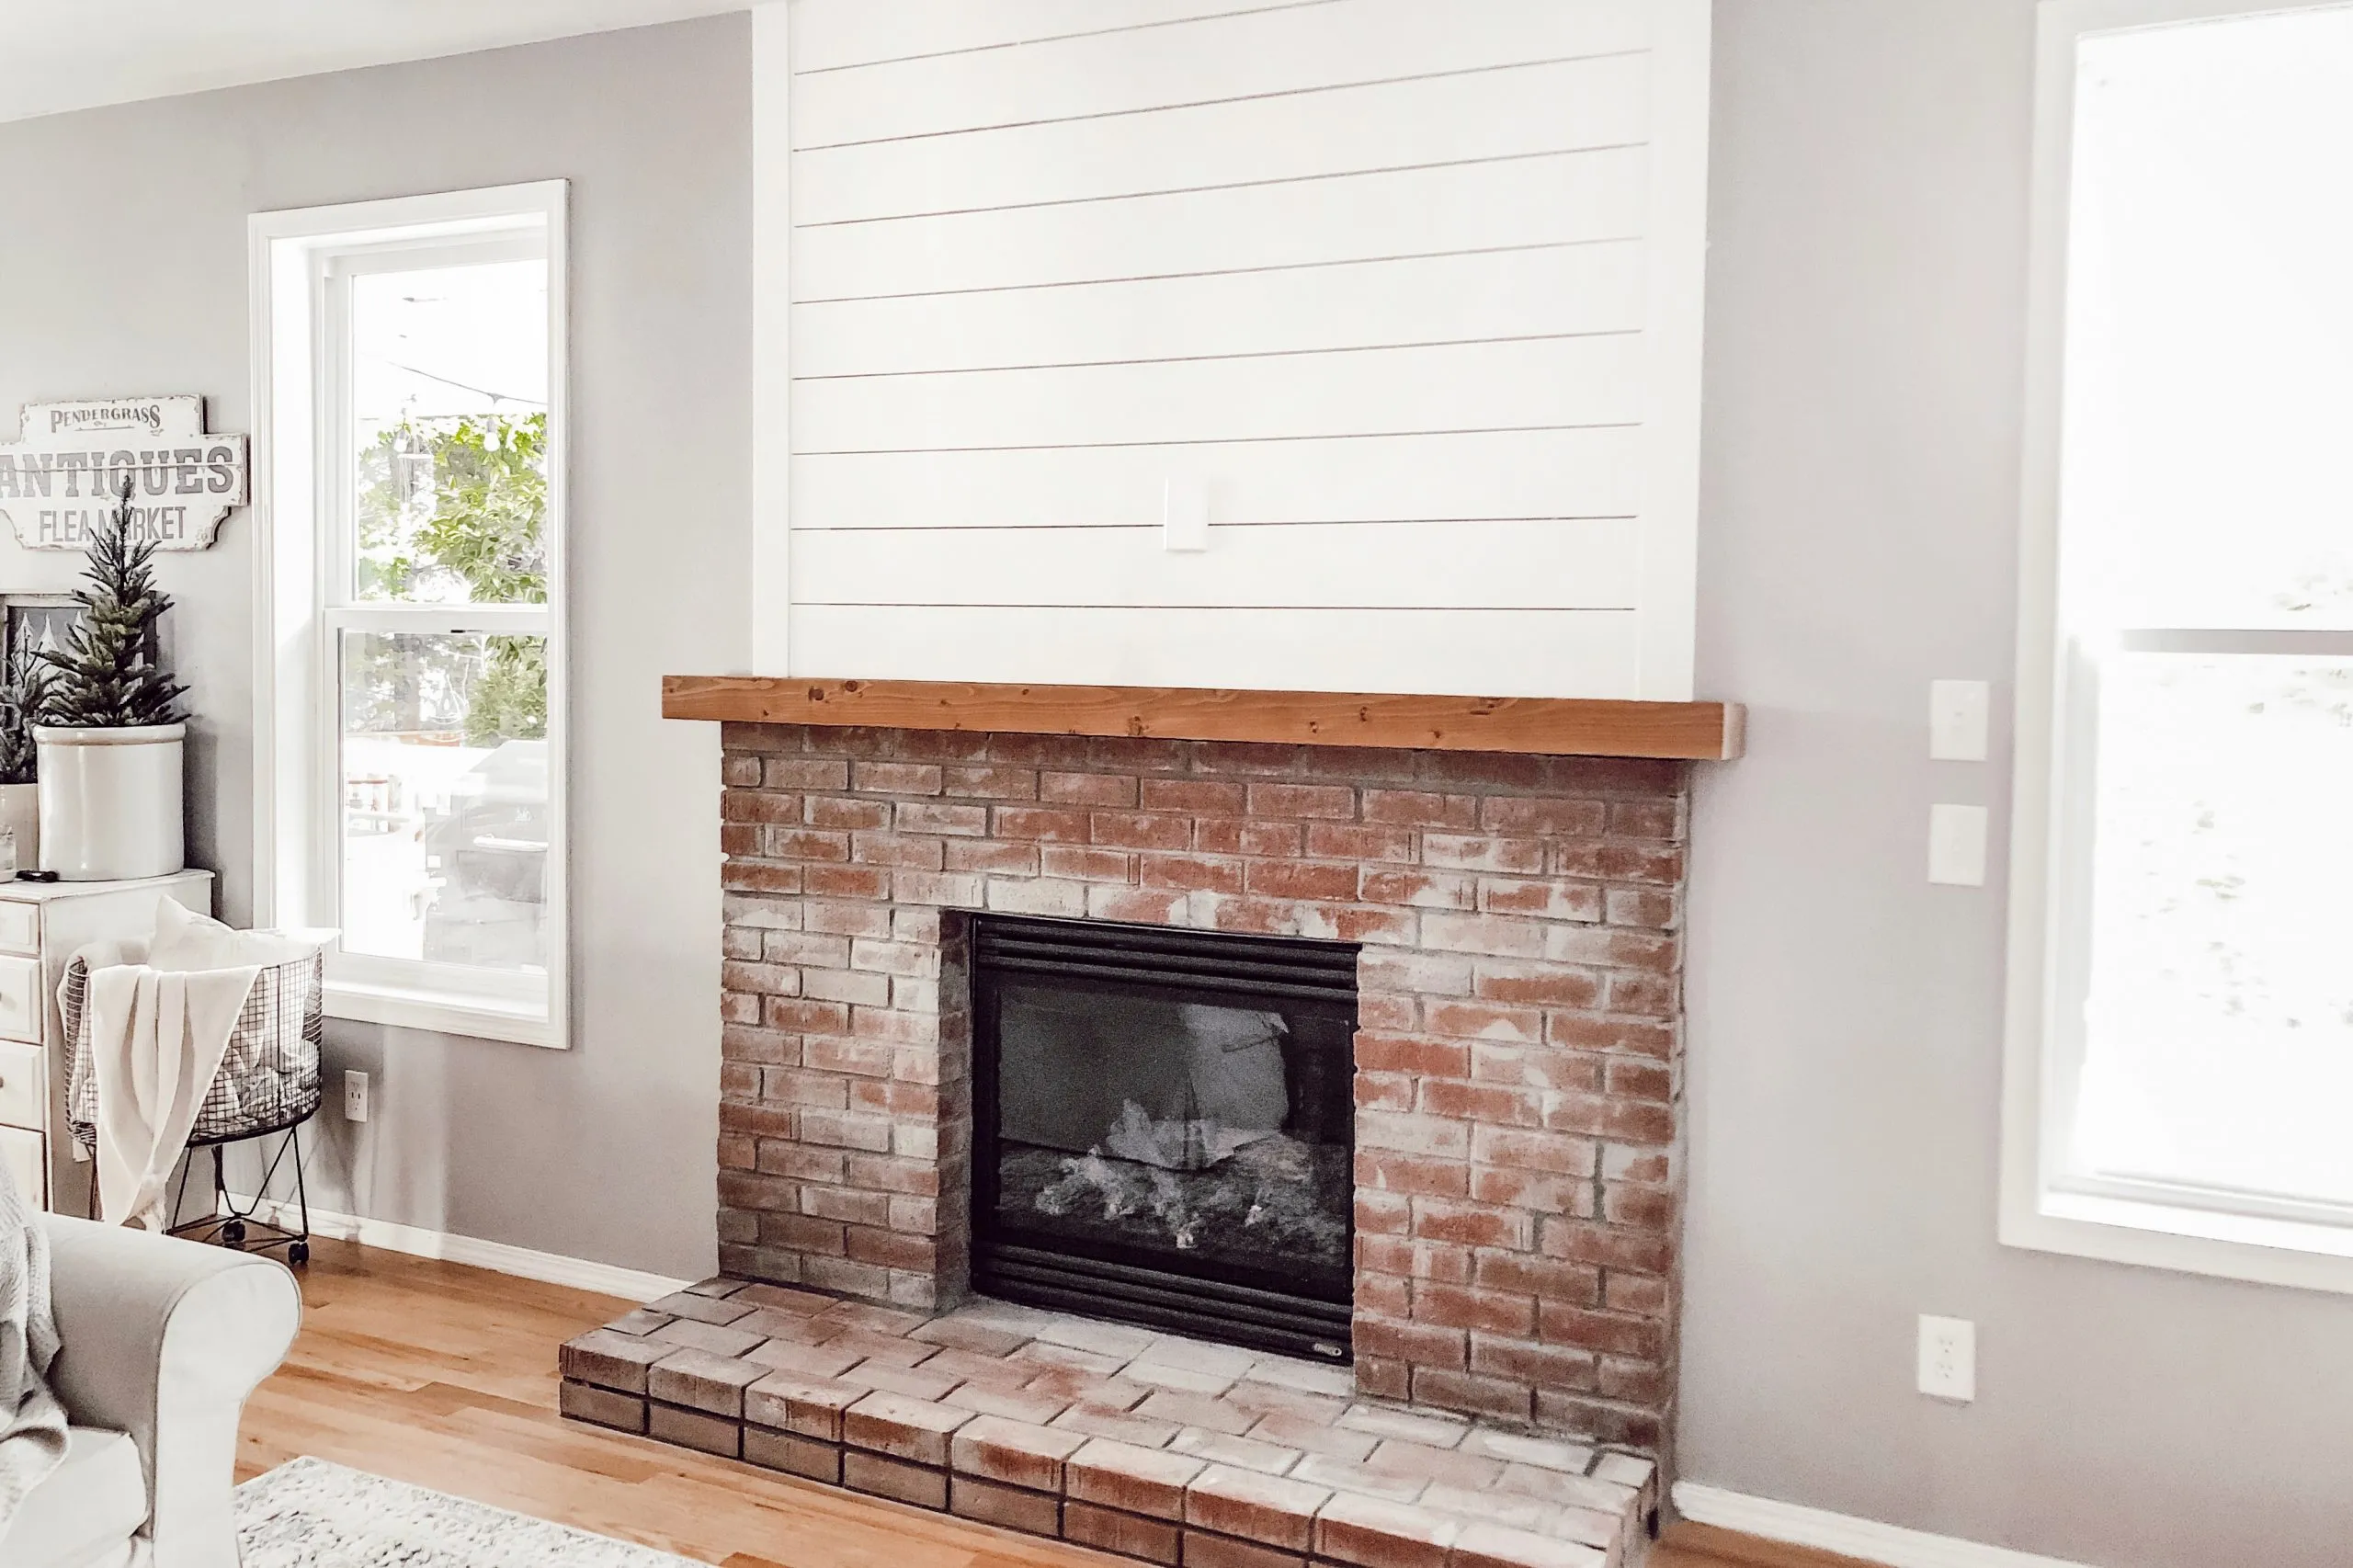 What To Do With A Brick Fireplace